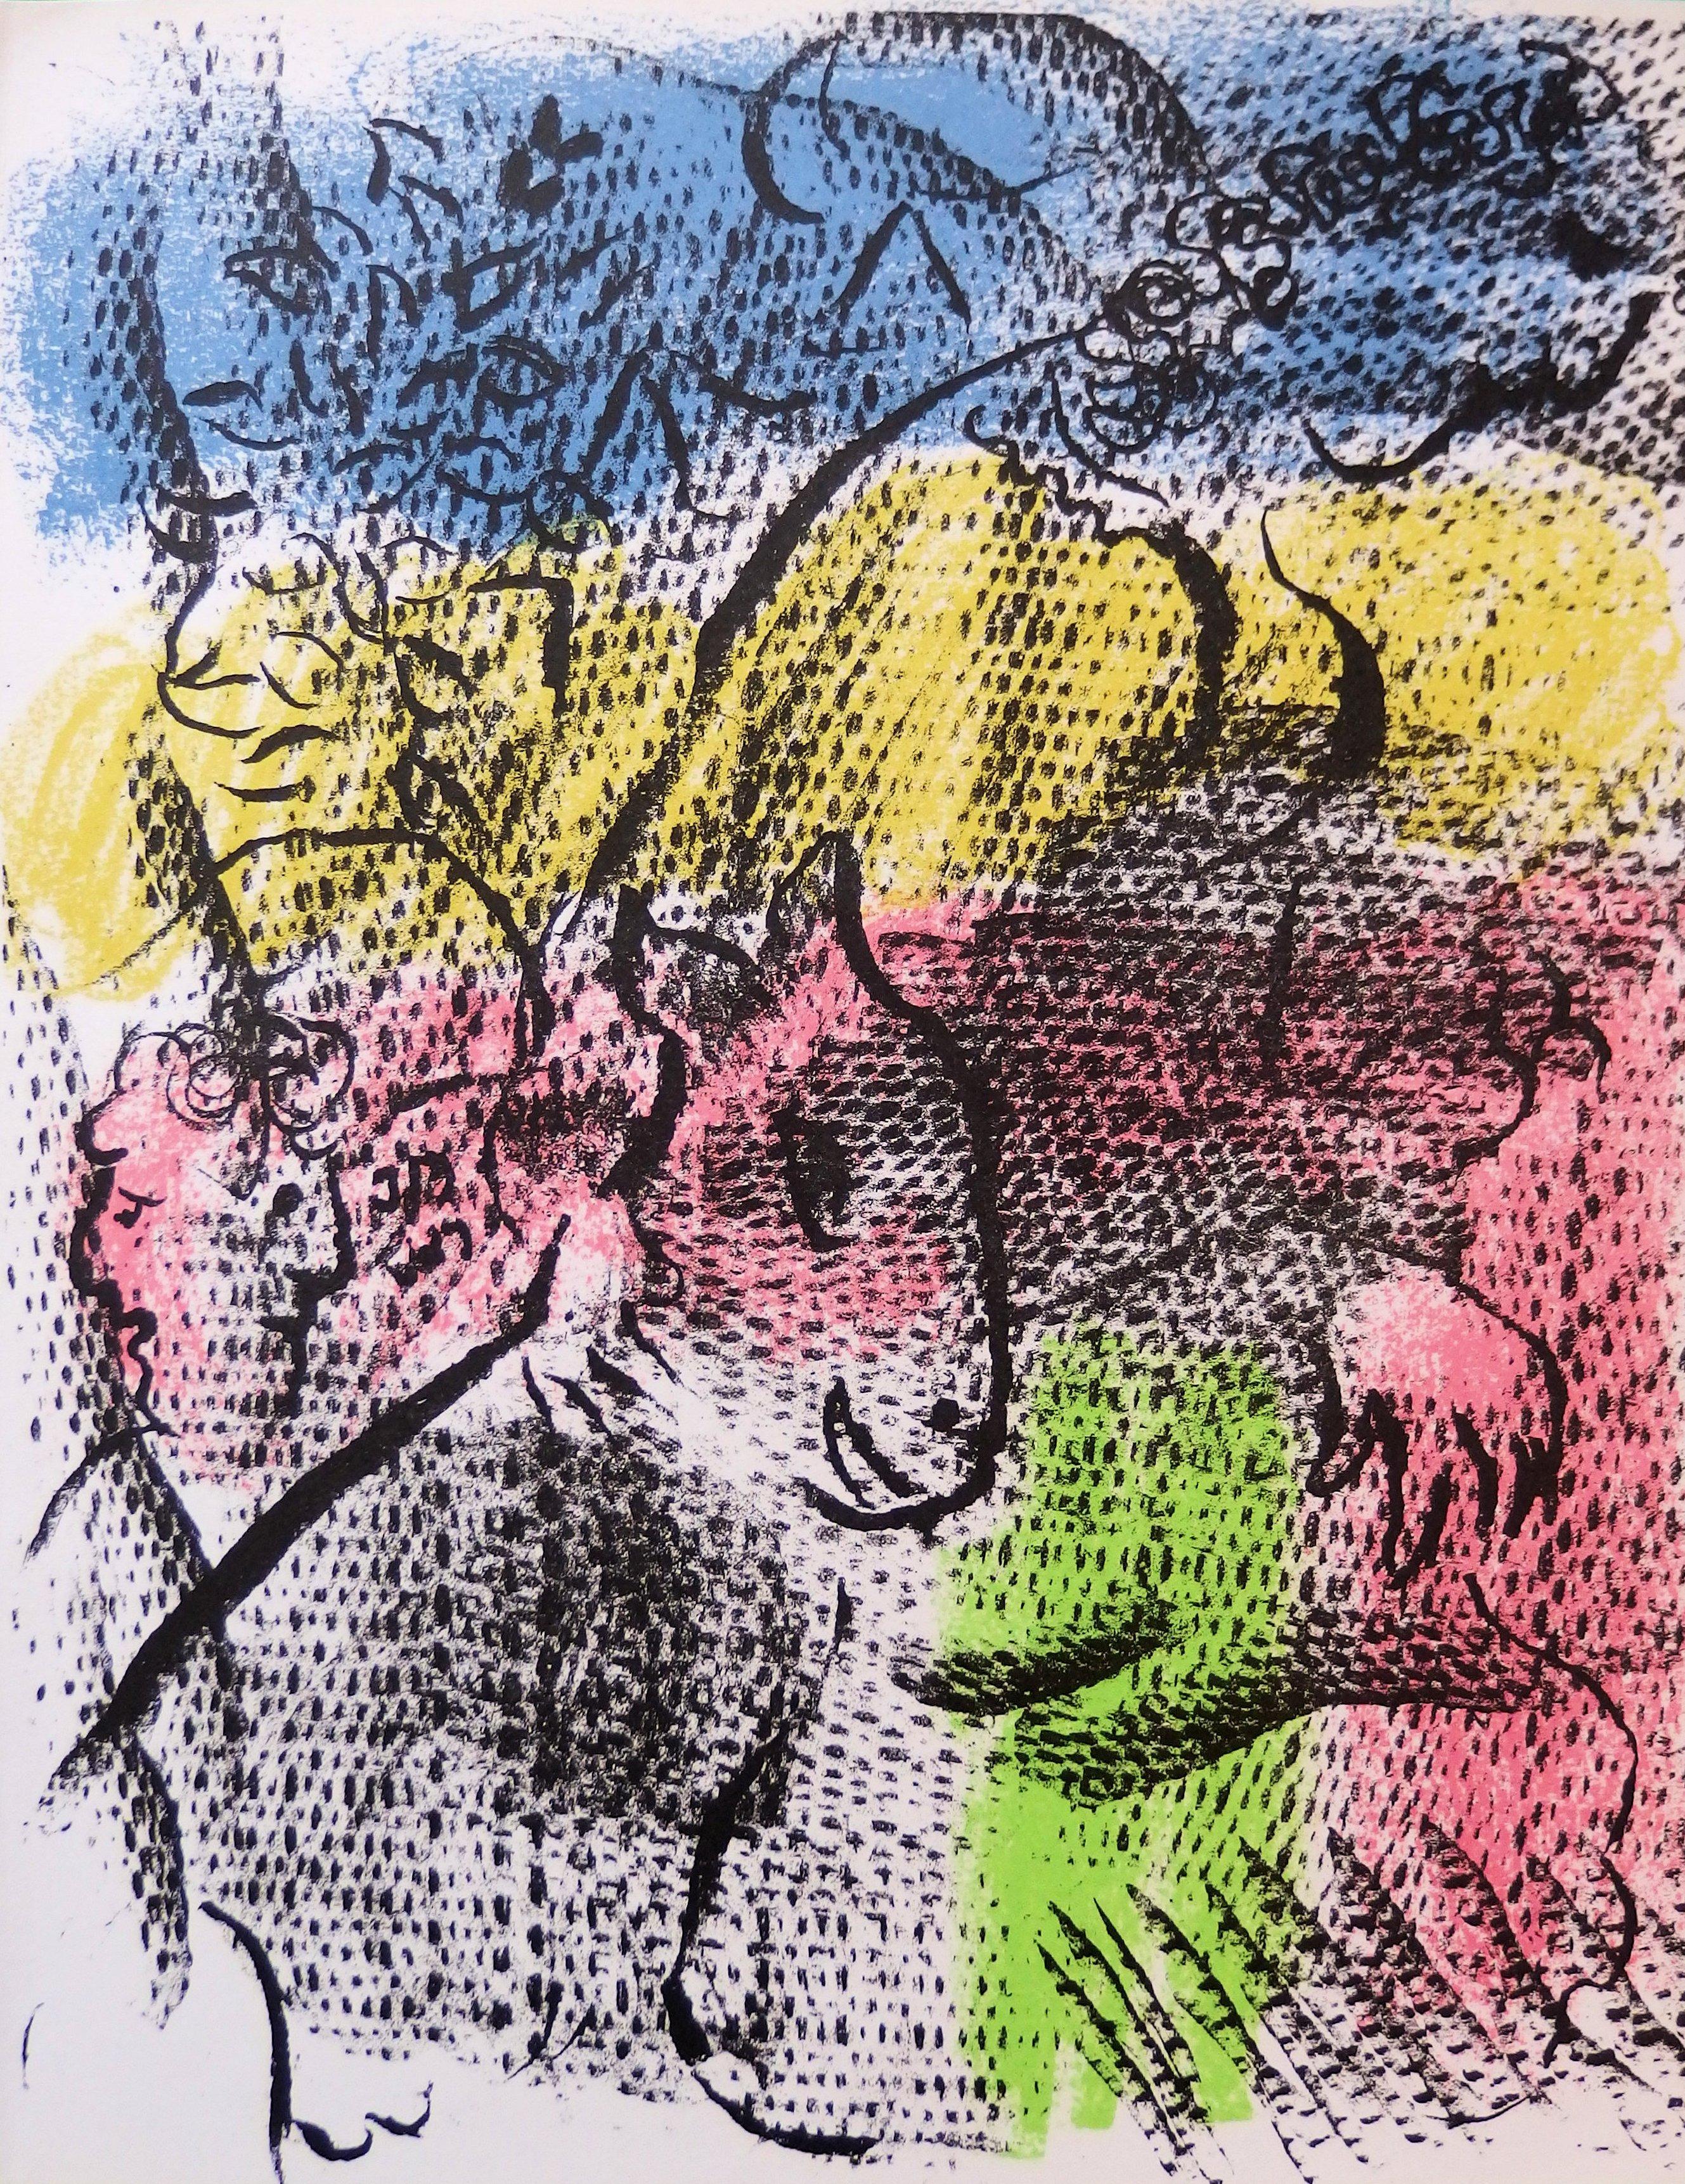 Marc Chagall Abstract Print - Couple with a Goat - Original stone lithograph (Mourlot #608) - 1970